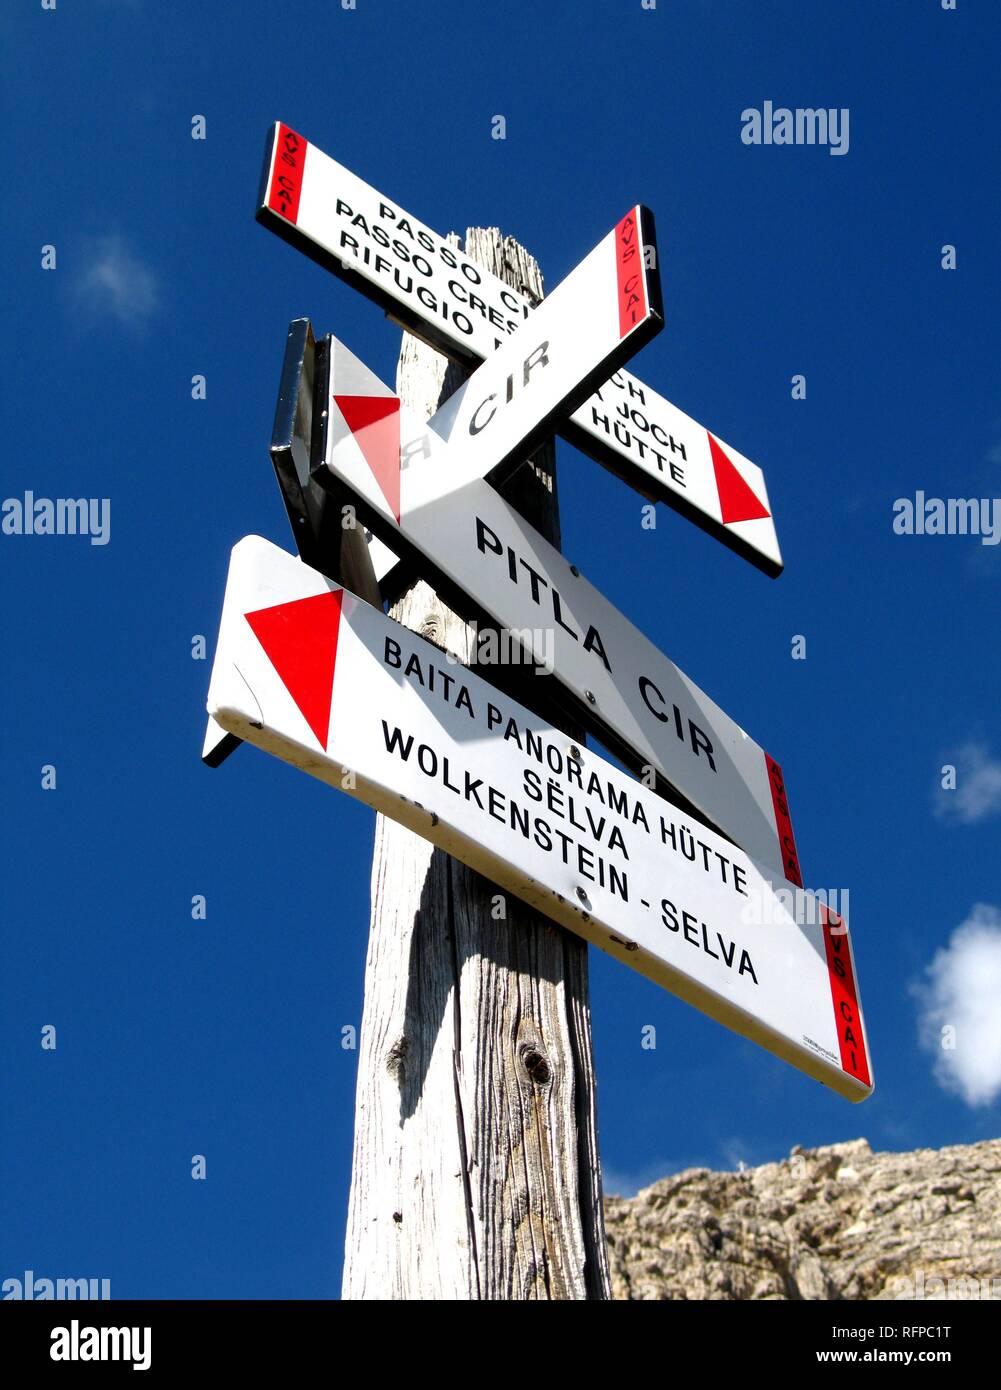 Signpost for hiker seen in South tyrol, Italy Stock Photo